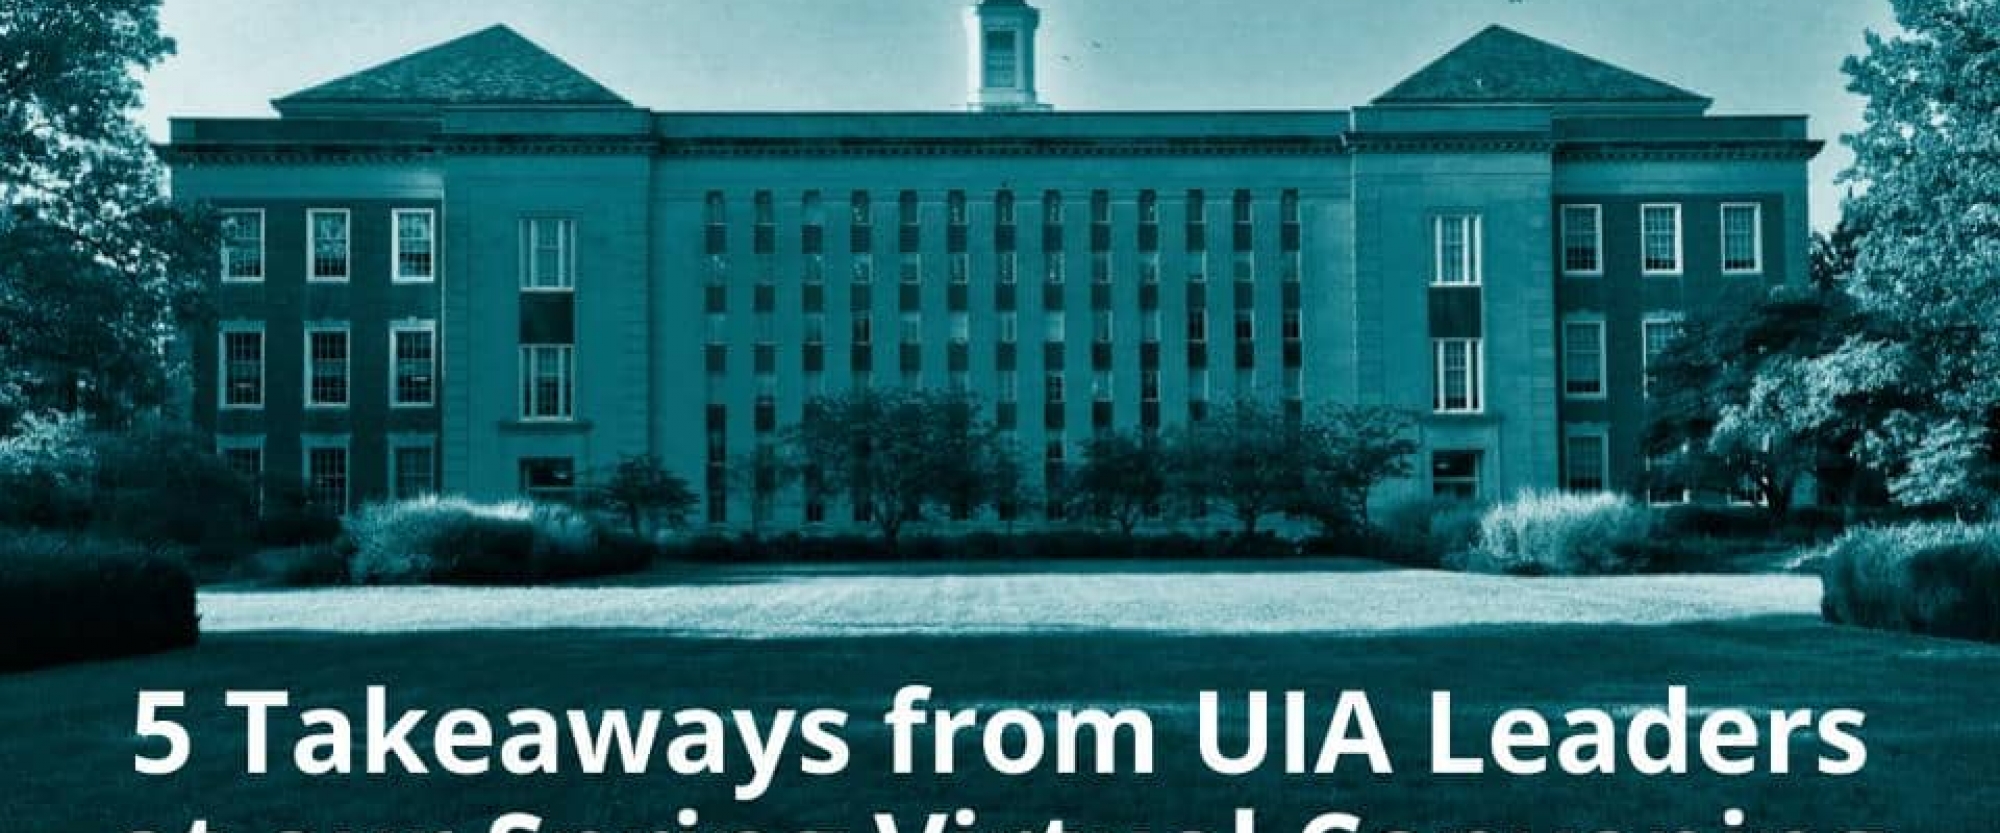 5 Takeaways from UIA Leaders at our Virtual Spring Convening